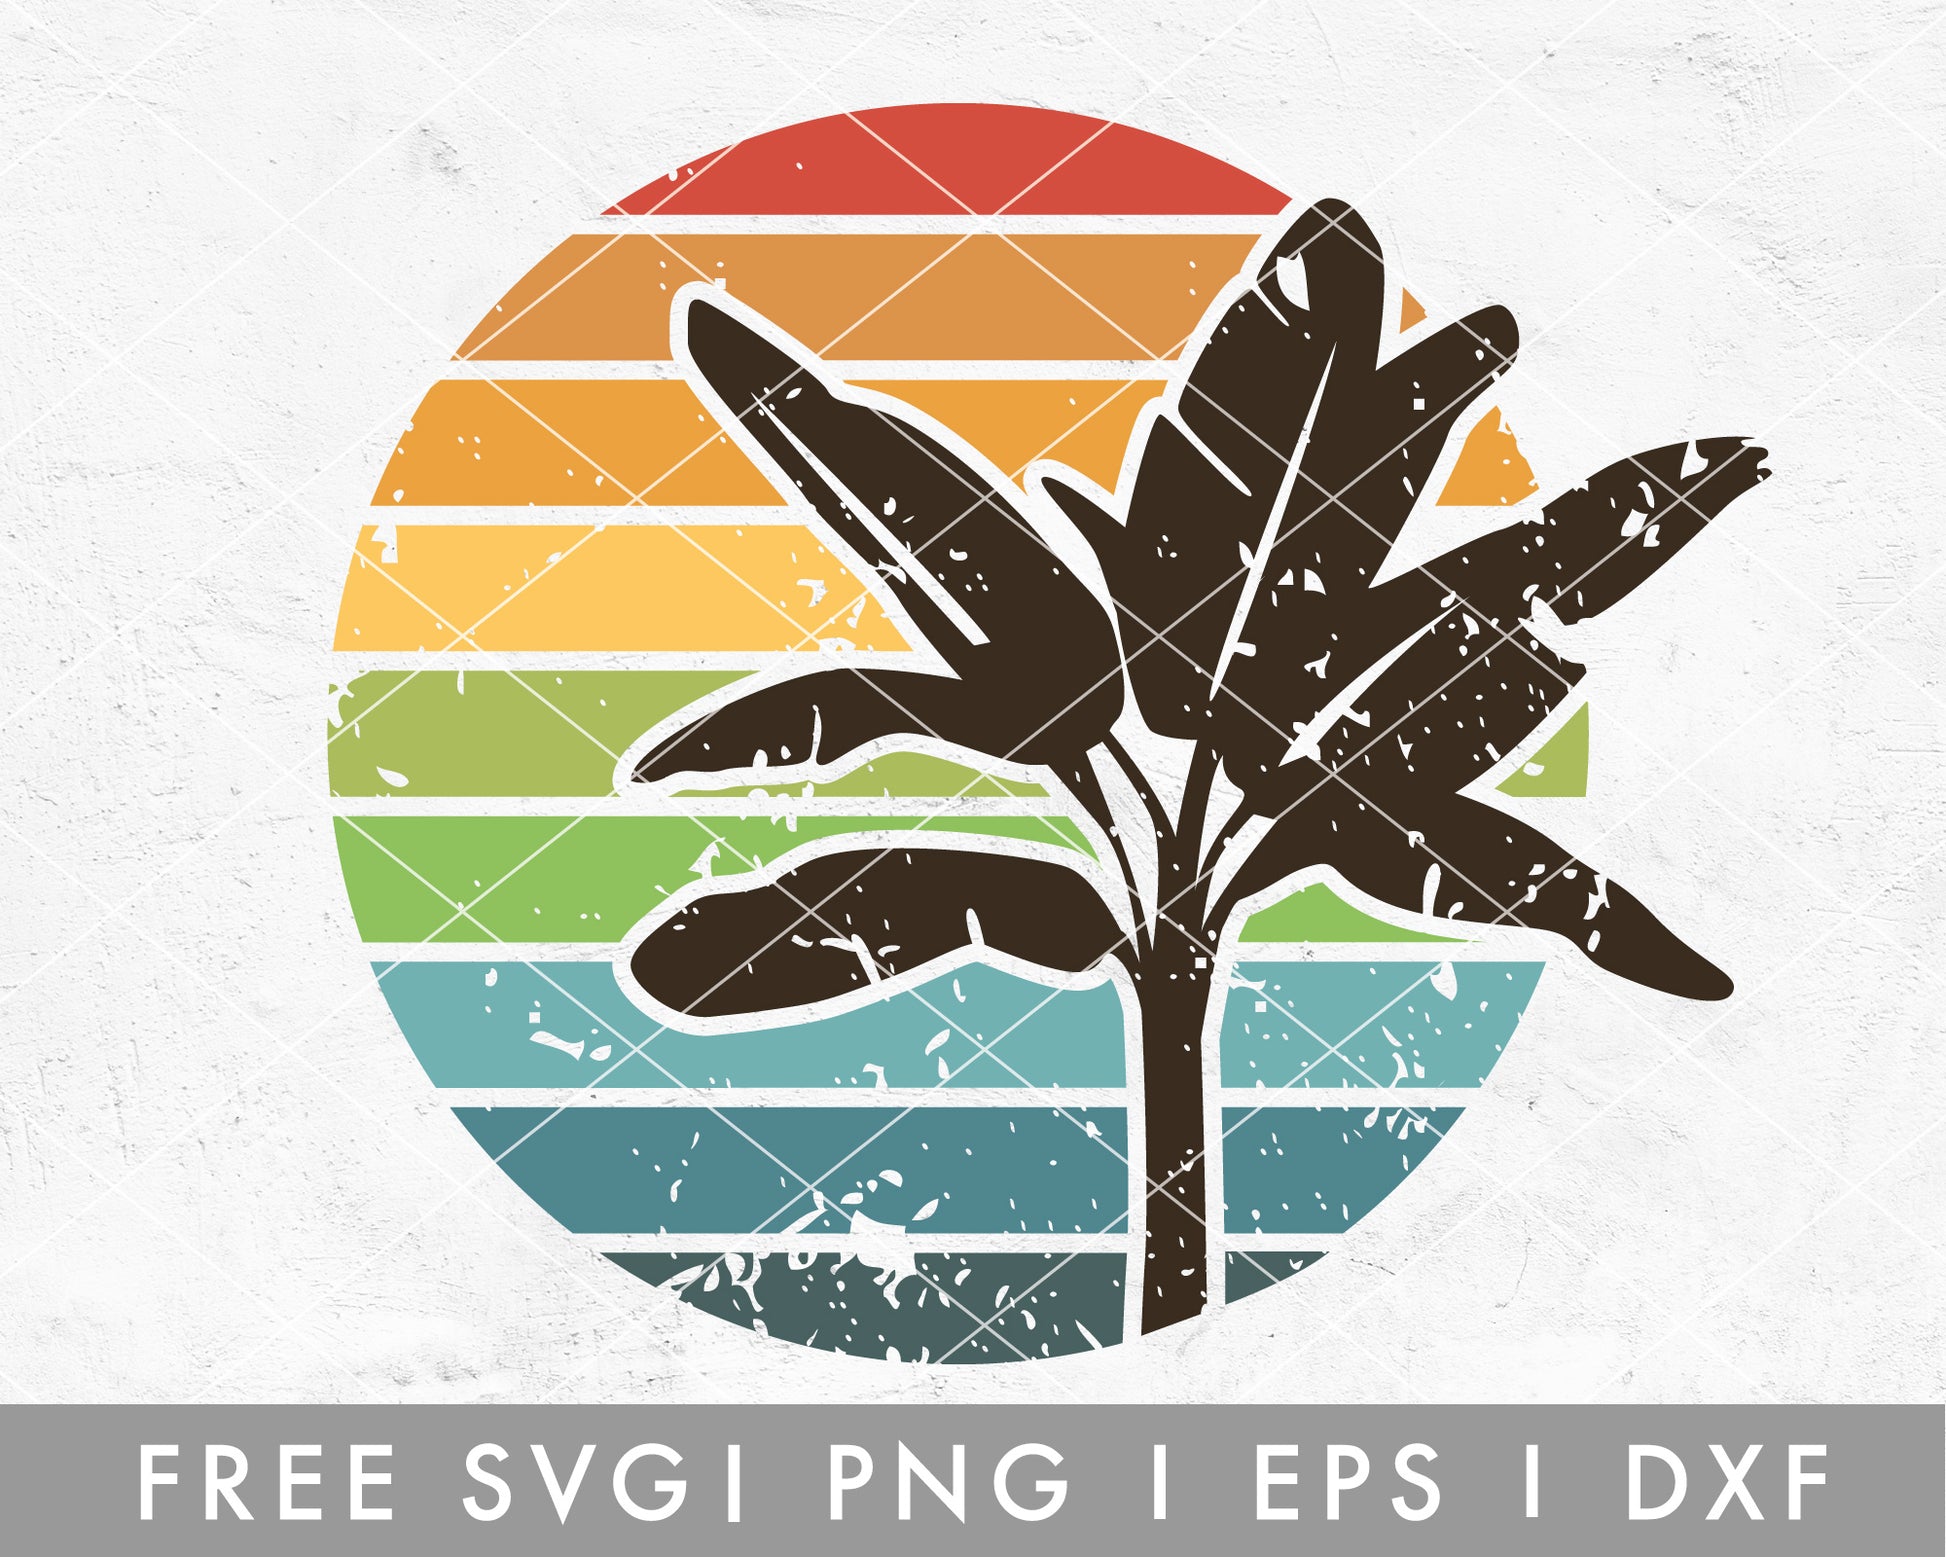 FREE Summer SVG | Palm Tree SVG Cut File for Cricut, Cameo Silhouette | Free SVG Cut File